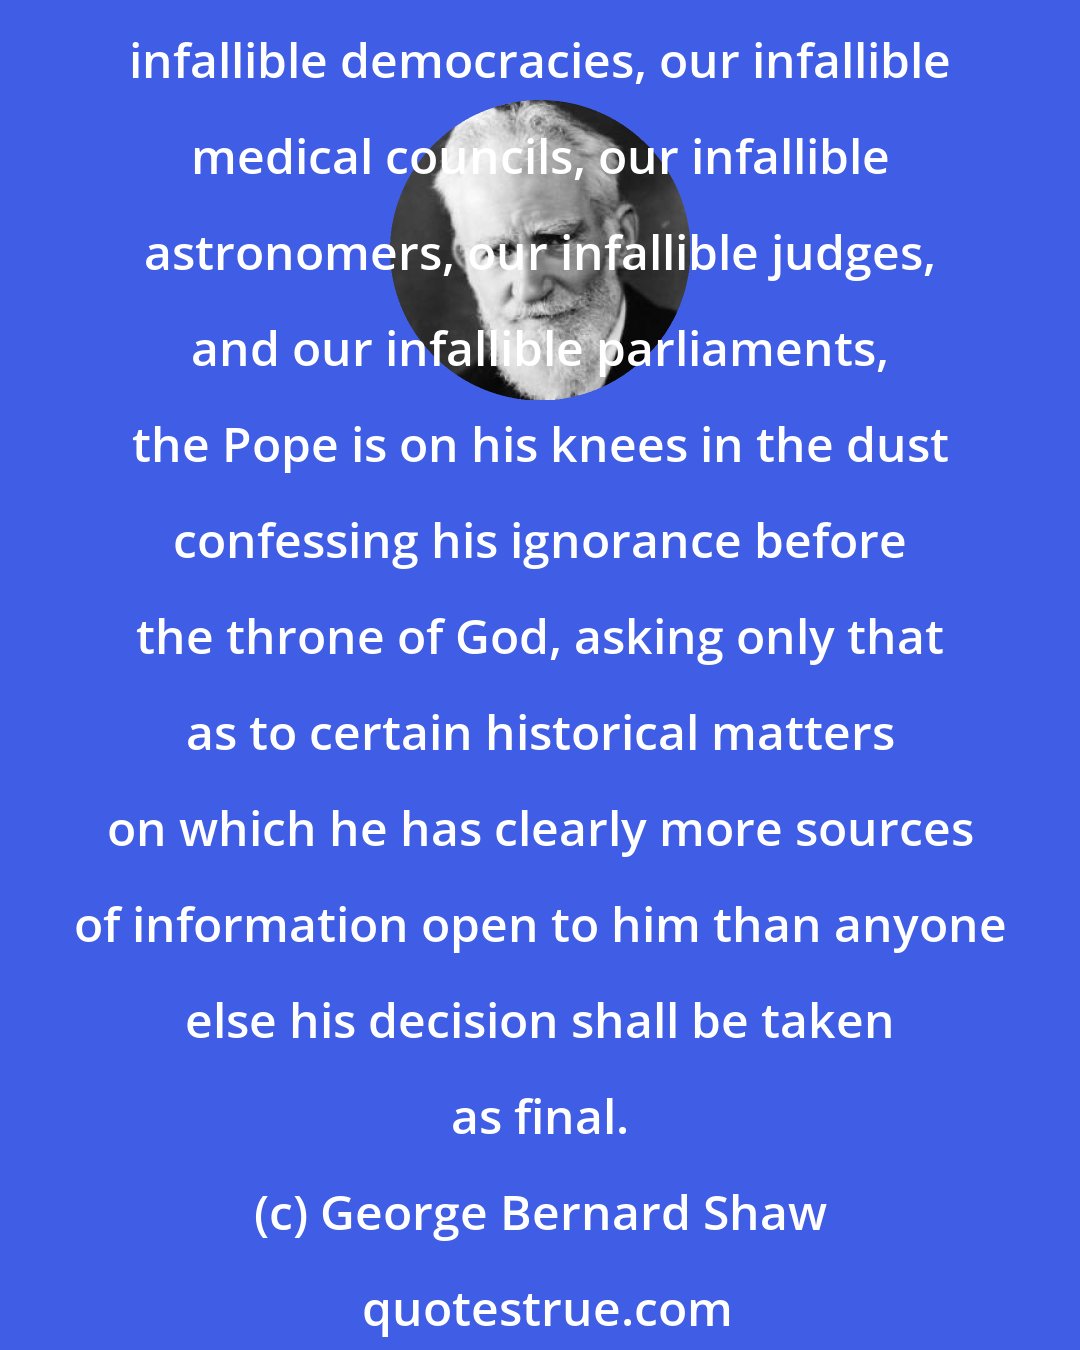 George Bernard Shaw: Perhaps I had better inform my Protestant readers that the famous Dogma of Papal Infallibility is by far the most modest pretension of the kind in existence. Compared with our infallible democracies, our infallible medical councils, our infallible astronomers, our infallible judges, and our infallible parliaments, the Pope is on his knees in the dust confessing his ignorance before the throne of God, asking only that as to certain historical matters on which he has clearly more sources of information open to him than anyone else his decision shall be taken as final.